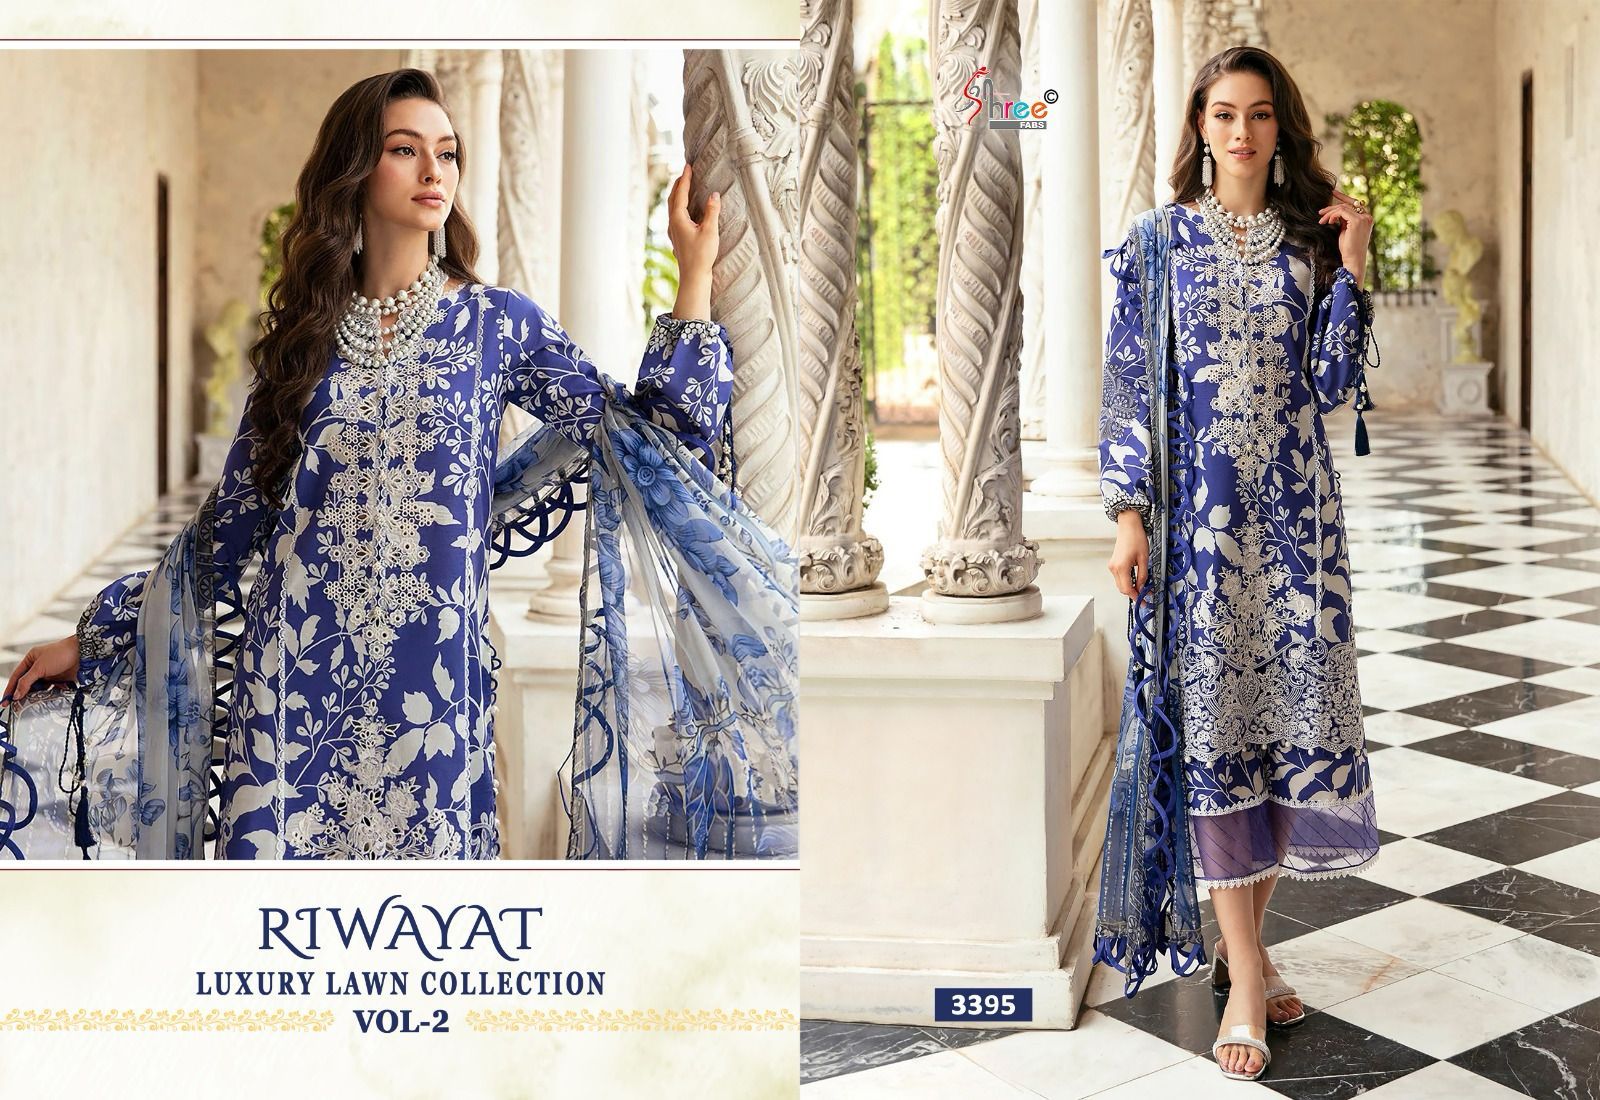 Shree Riwayat Luxury Lawn Collection Vol 2 collection 2